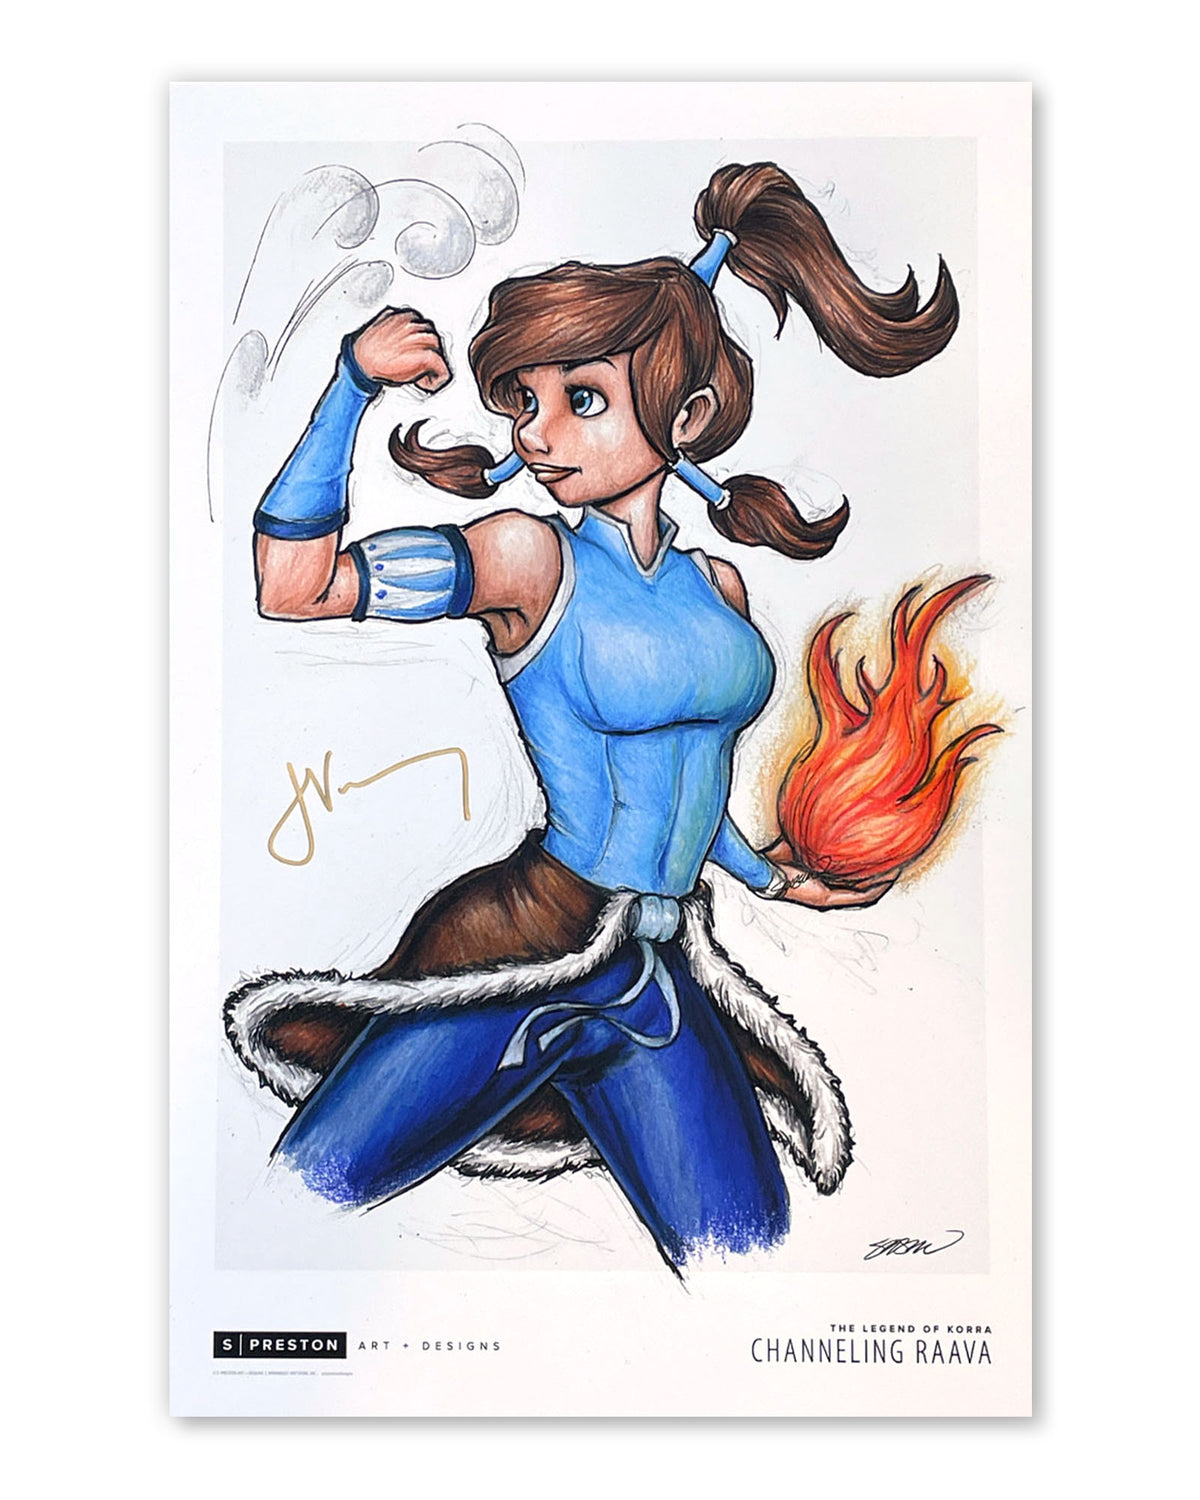 Channeling Raava Sketch Print - Korra - Janet Varney Autographed (Authenticated)